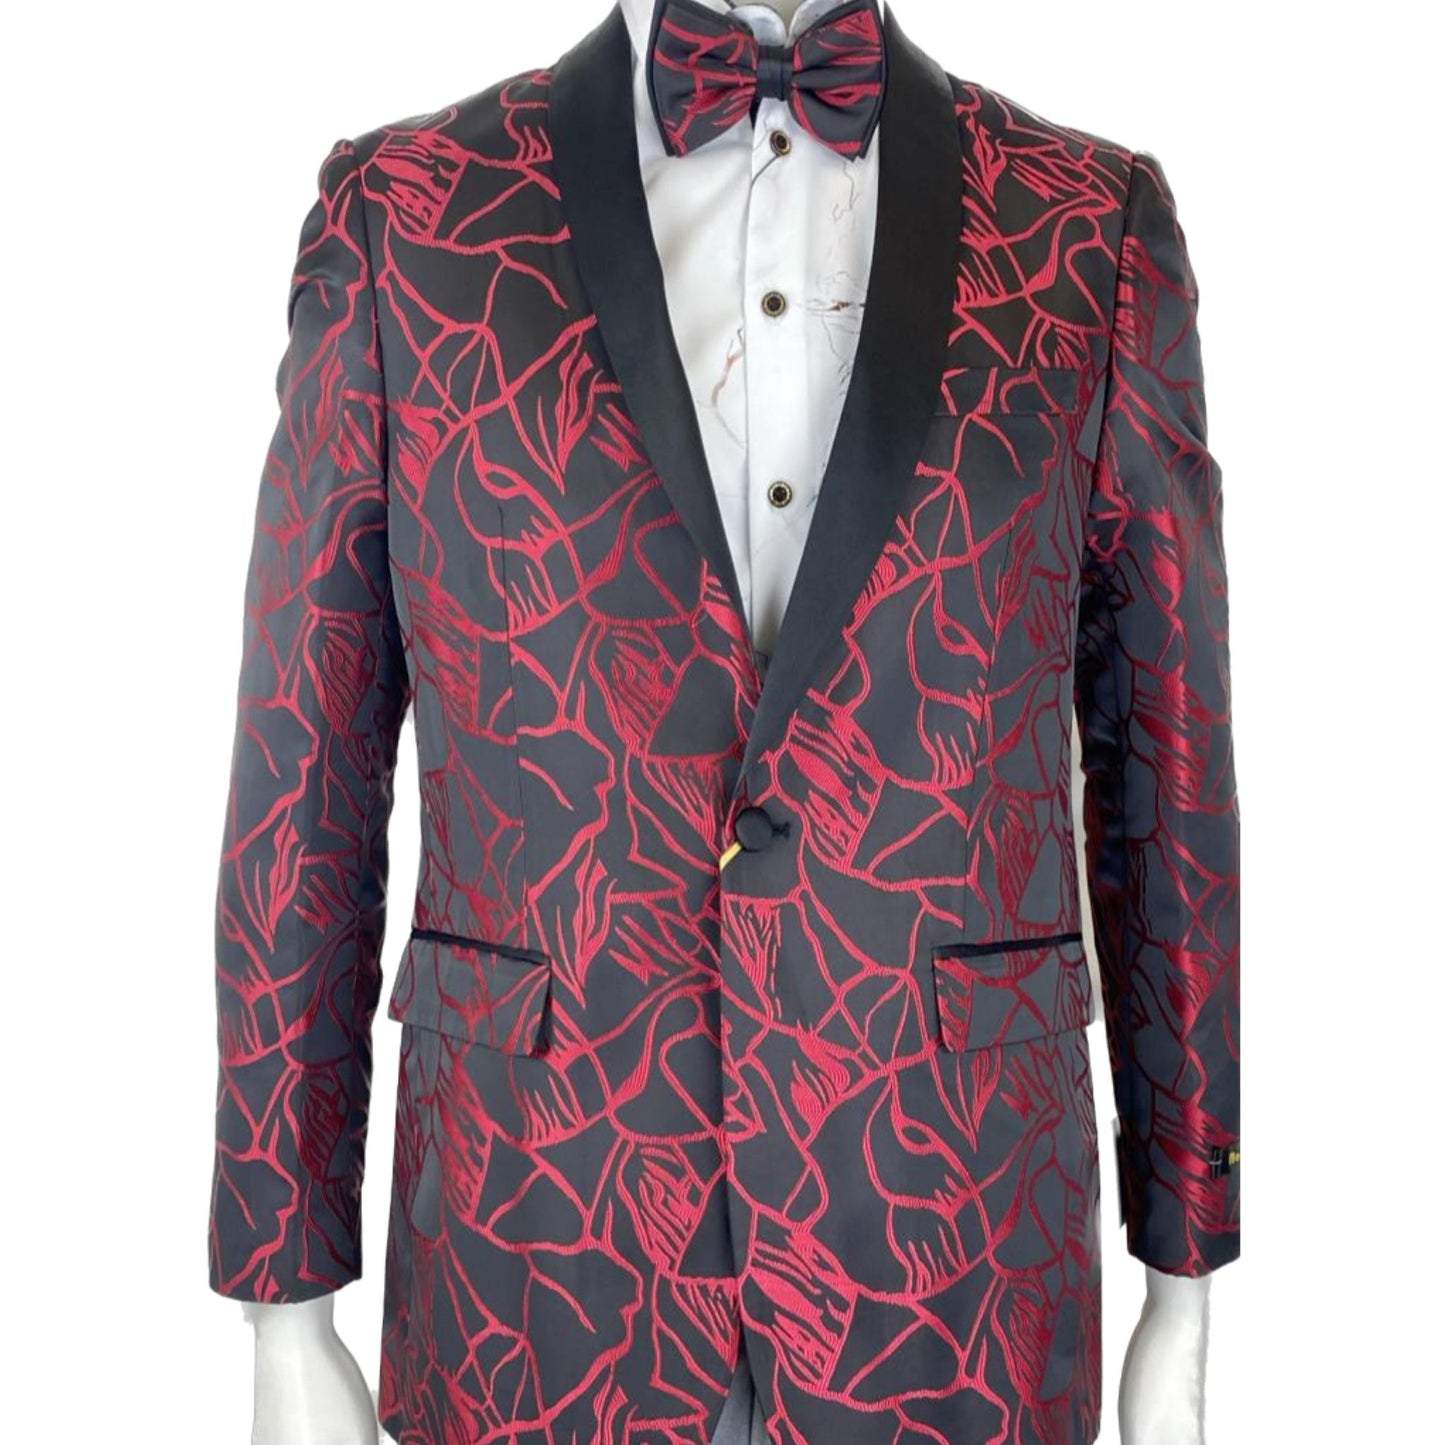 Black with Red Design with Matching Bowtie